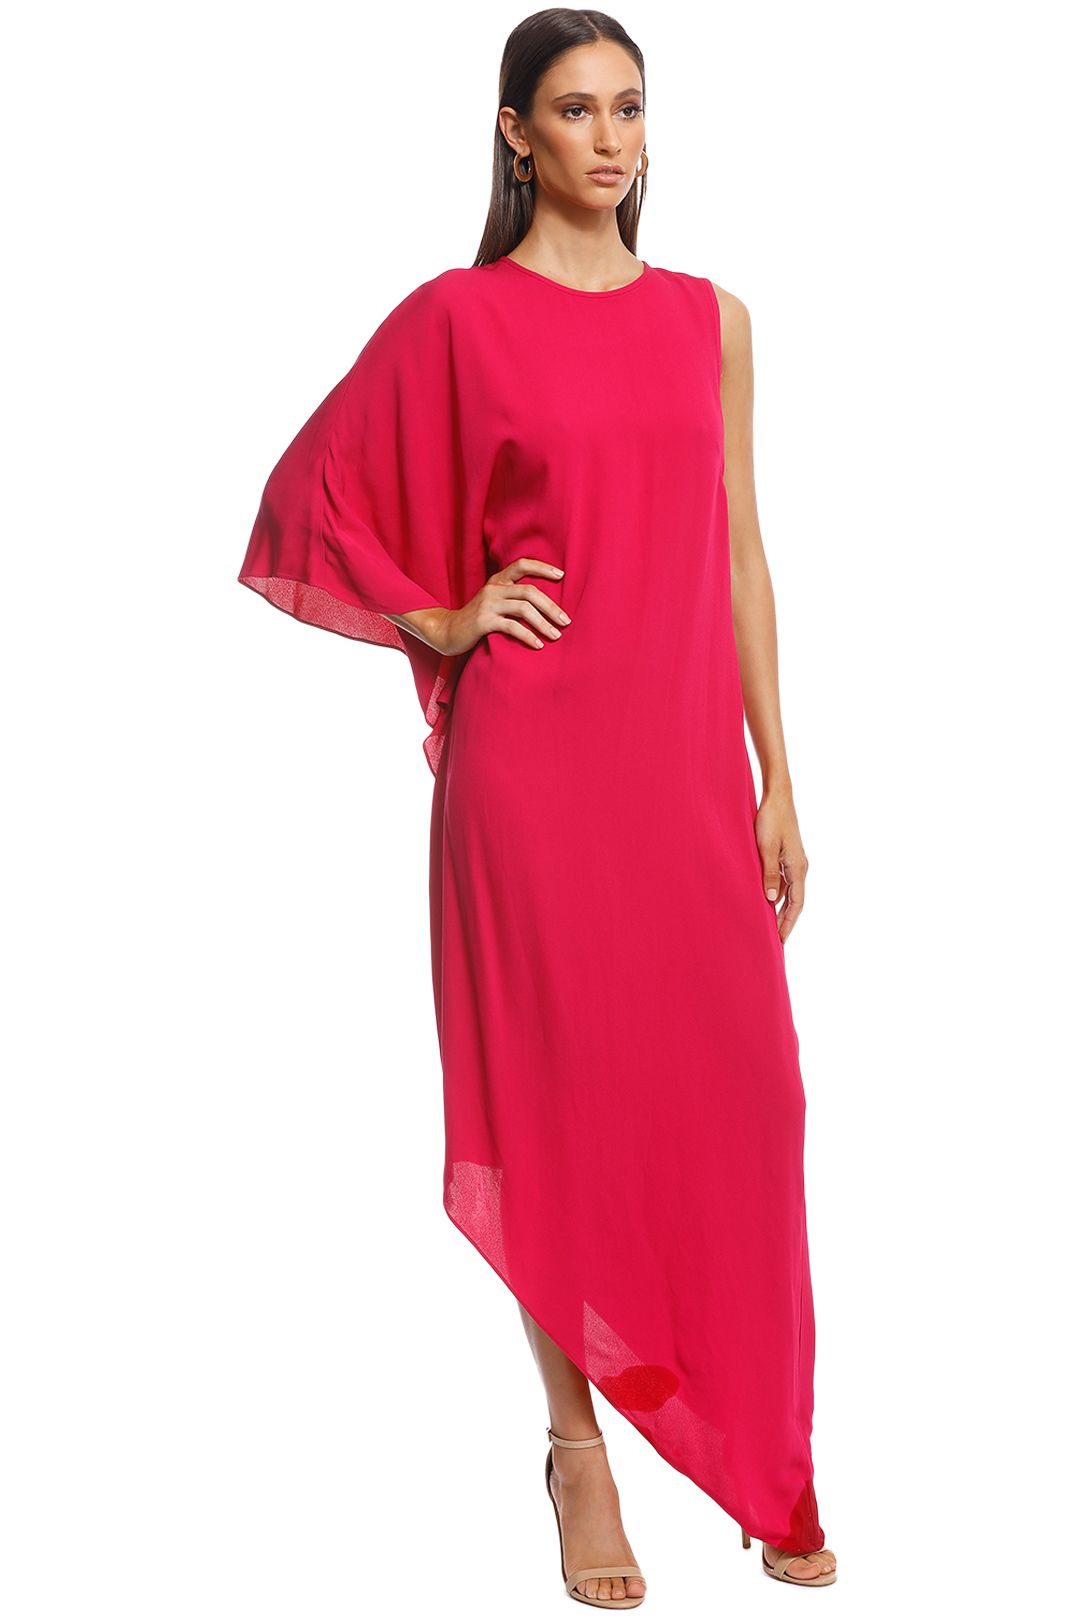 Ginger and Smart - Stasis Maxi Dress - Pink - Side A